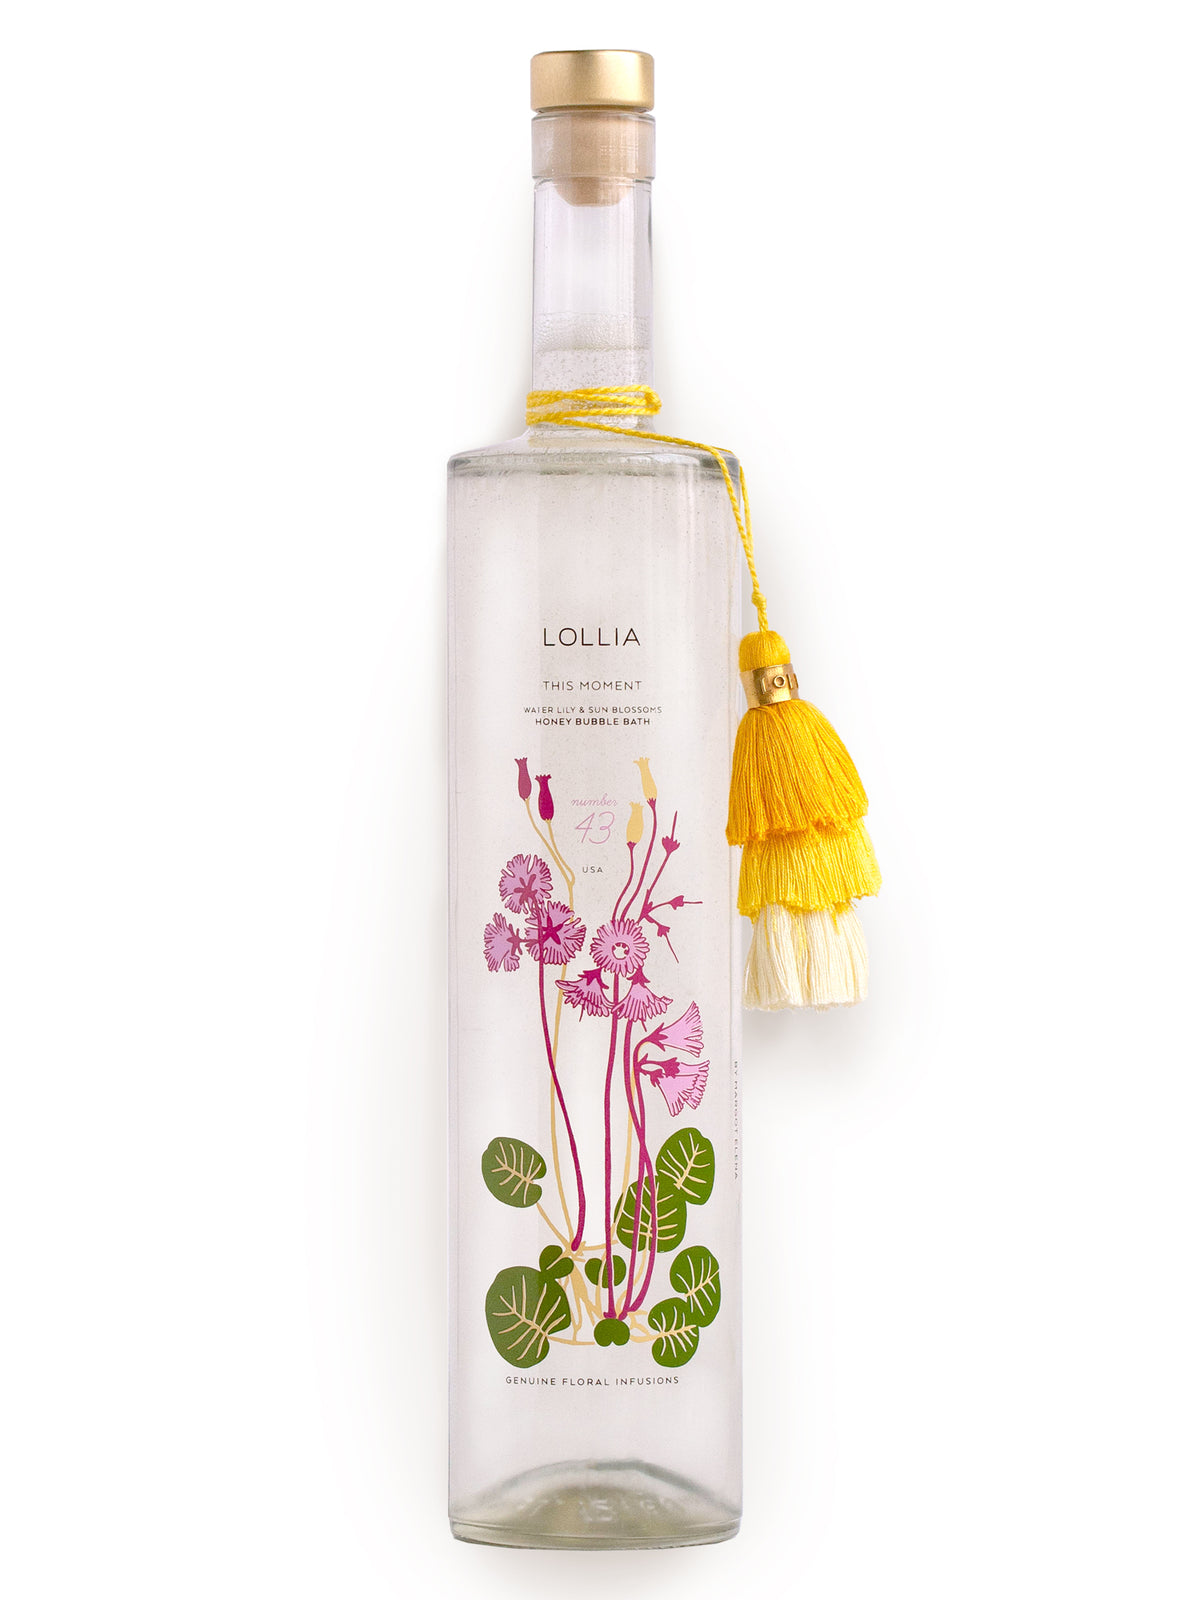 A delicate, clear bottle of Margot Elena's Lollia THIS MOMENT BUBBLE BATH oil with an ornate label featuring pink and green floral illustrations. It's adorned with a yellow tassel on the neck.